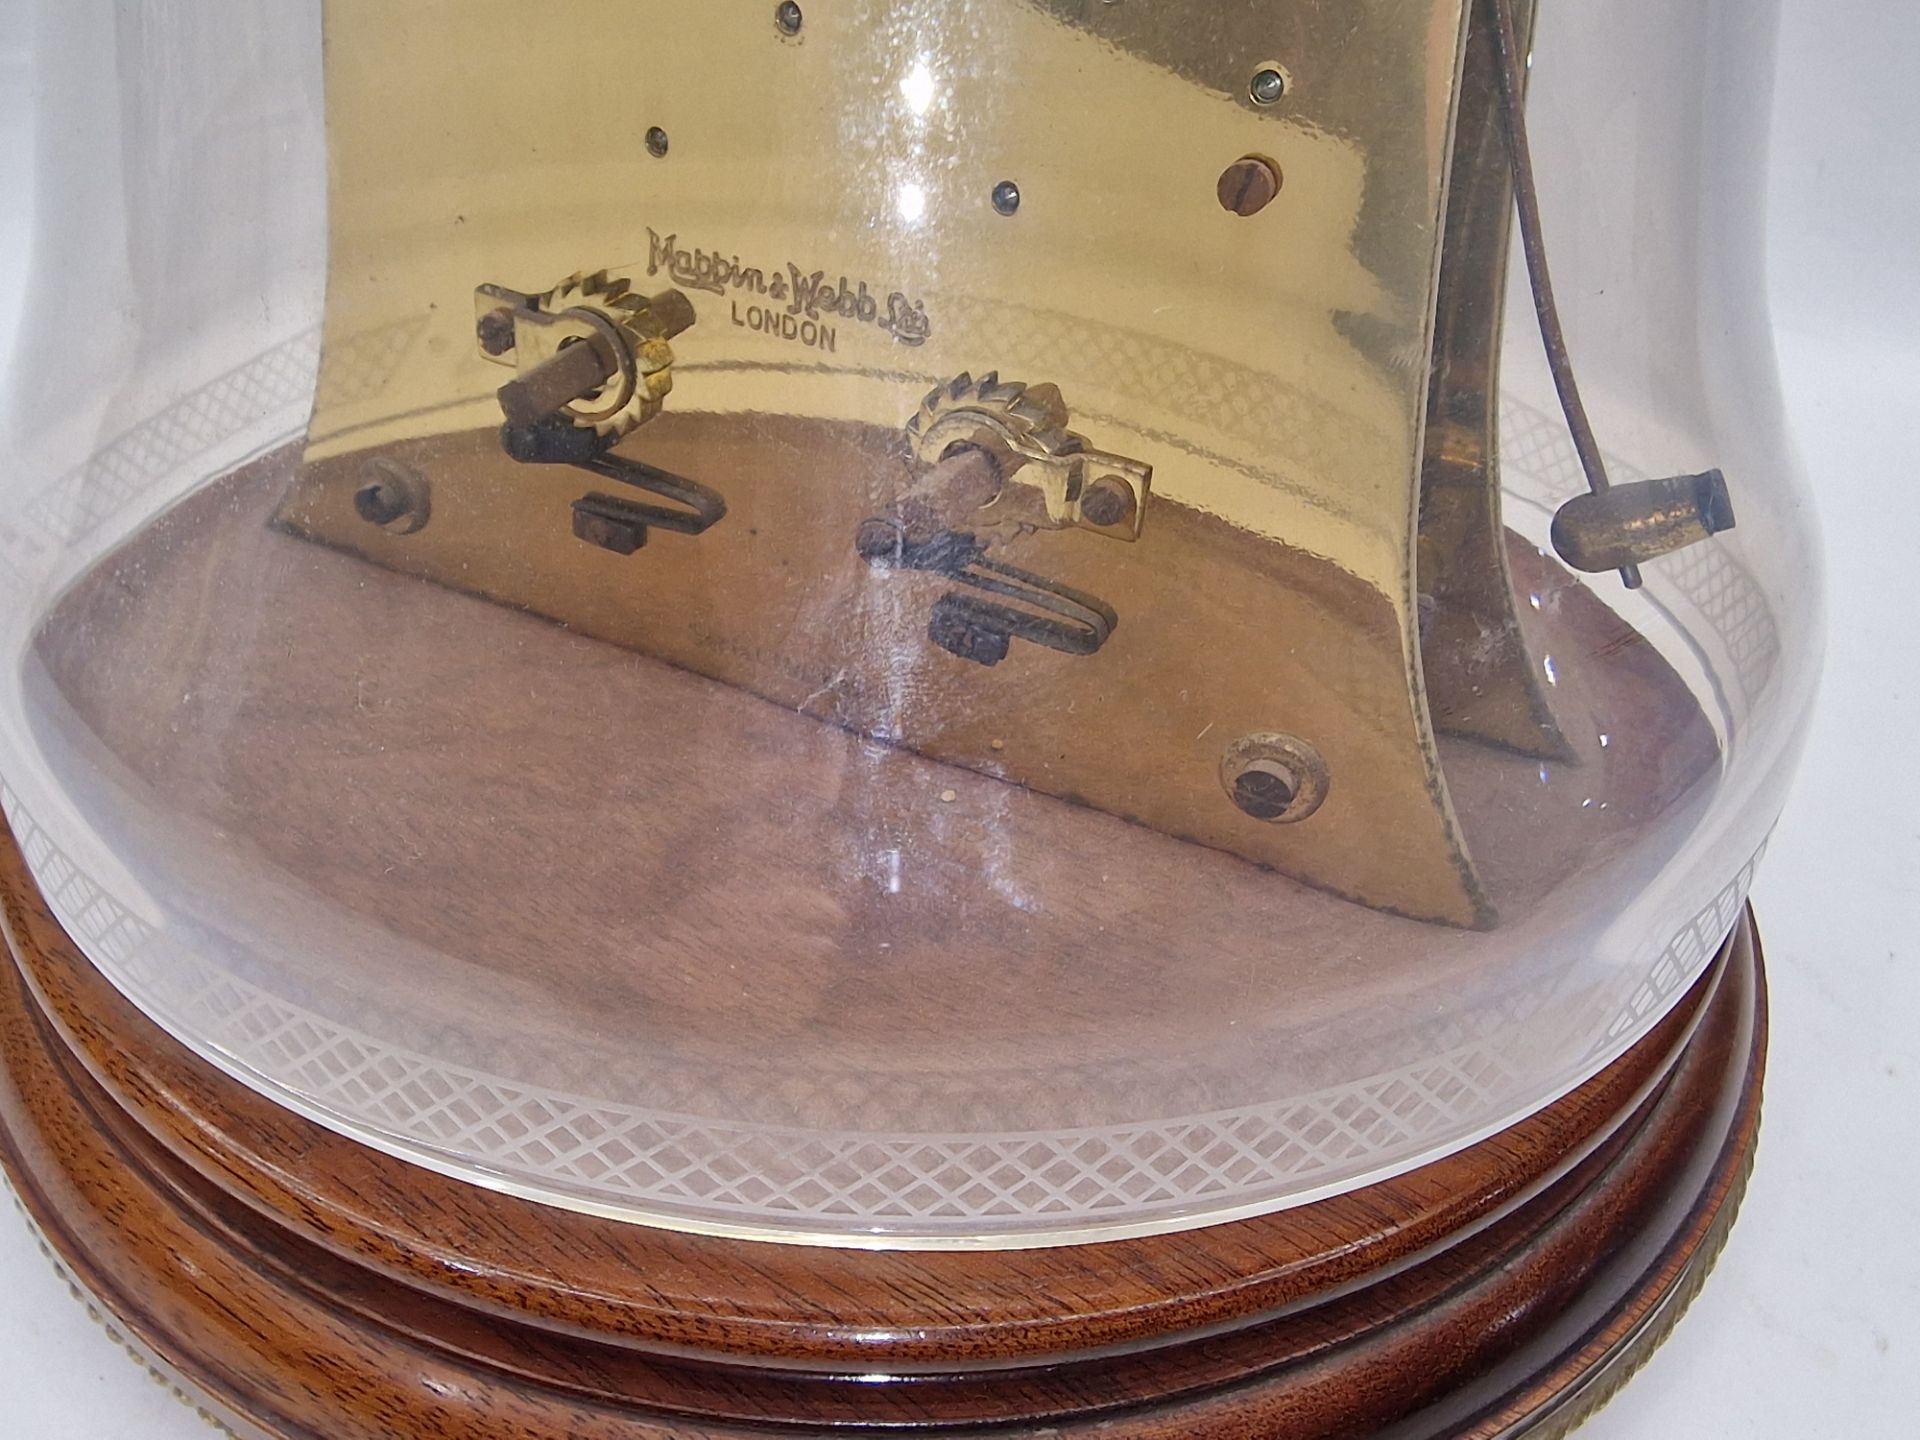 Mappin & Webb, London Maritime England 1982 clock encased within glass dome. No key so untested. - Image 3 of 3